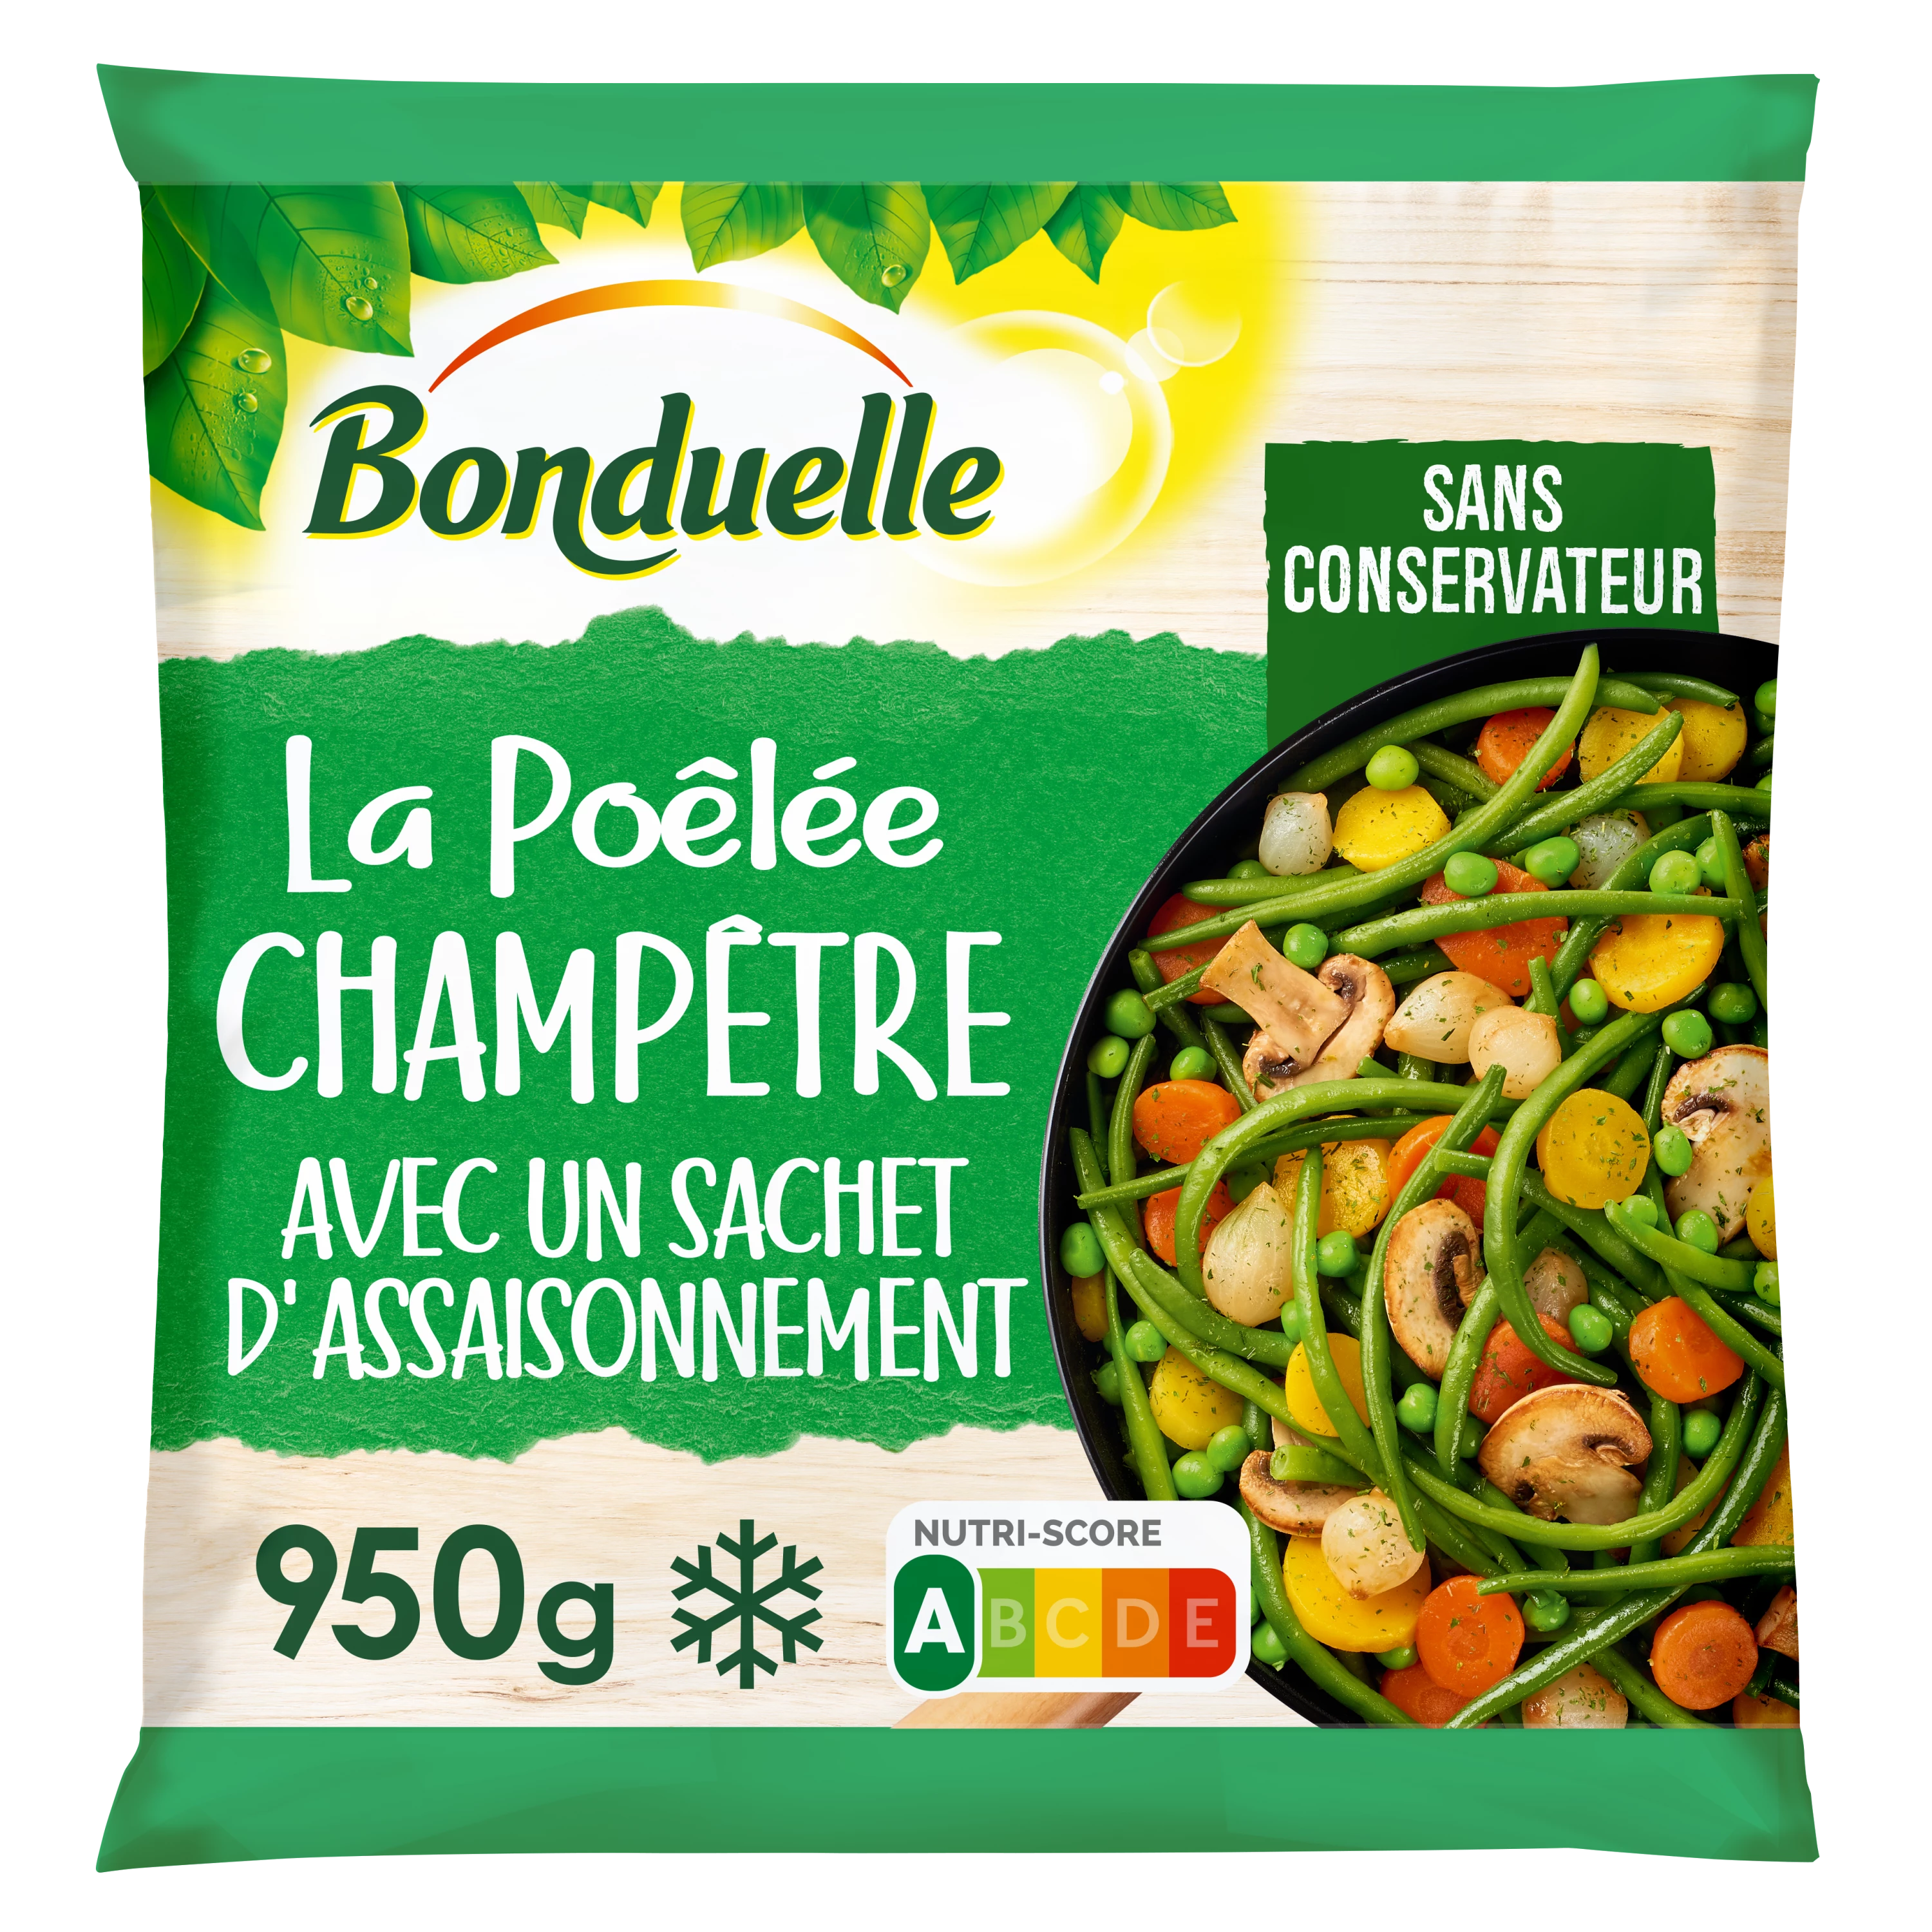 Poelee Champetre 950g